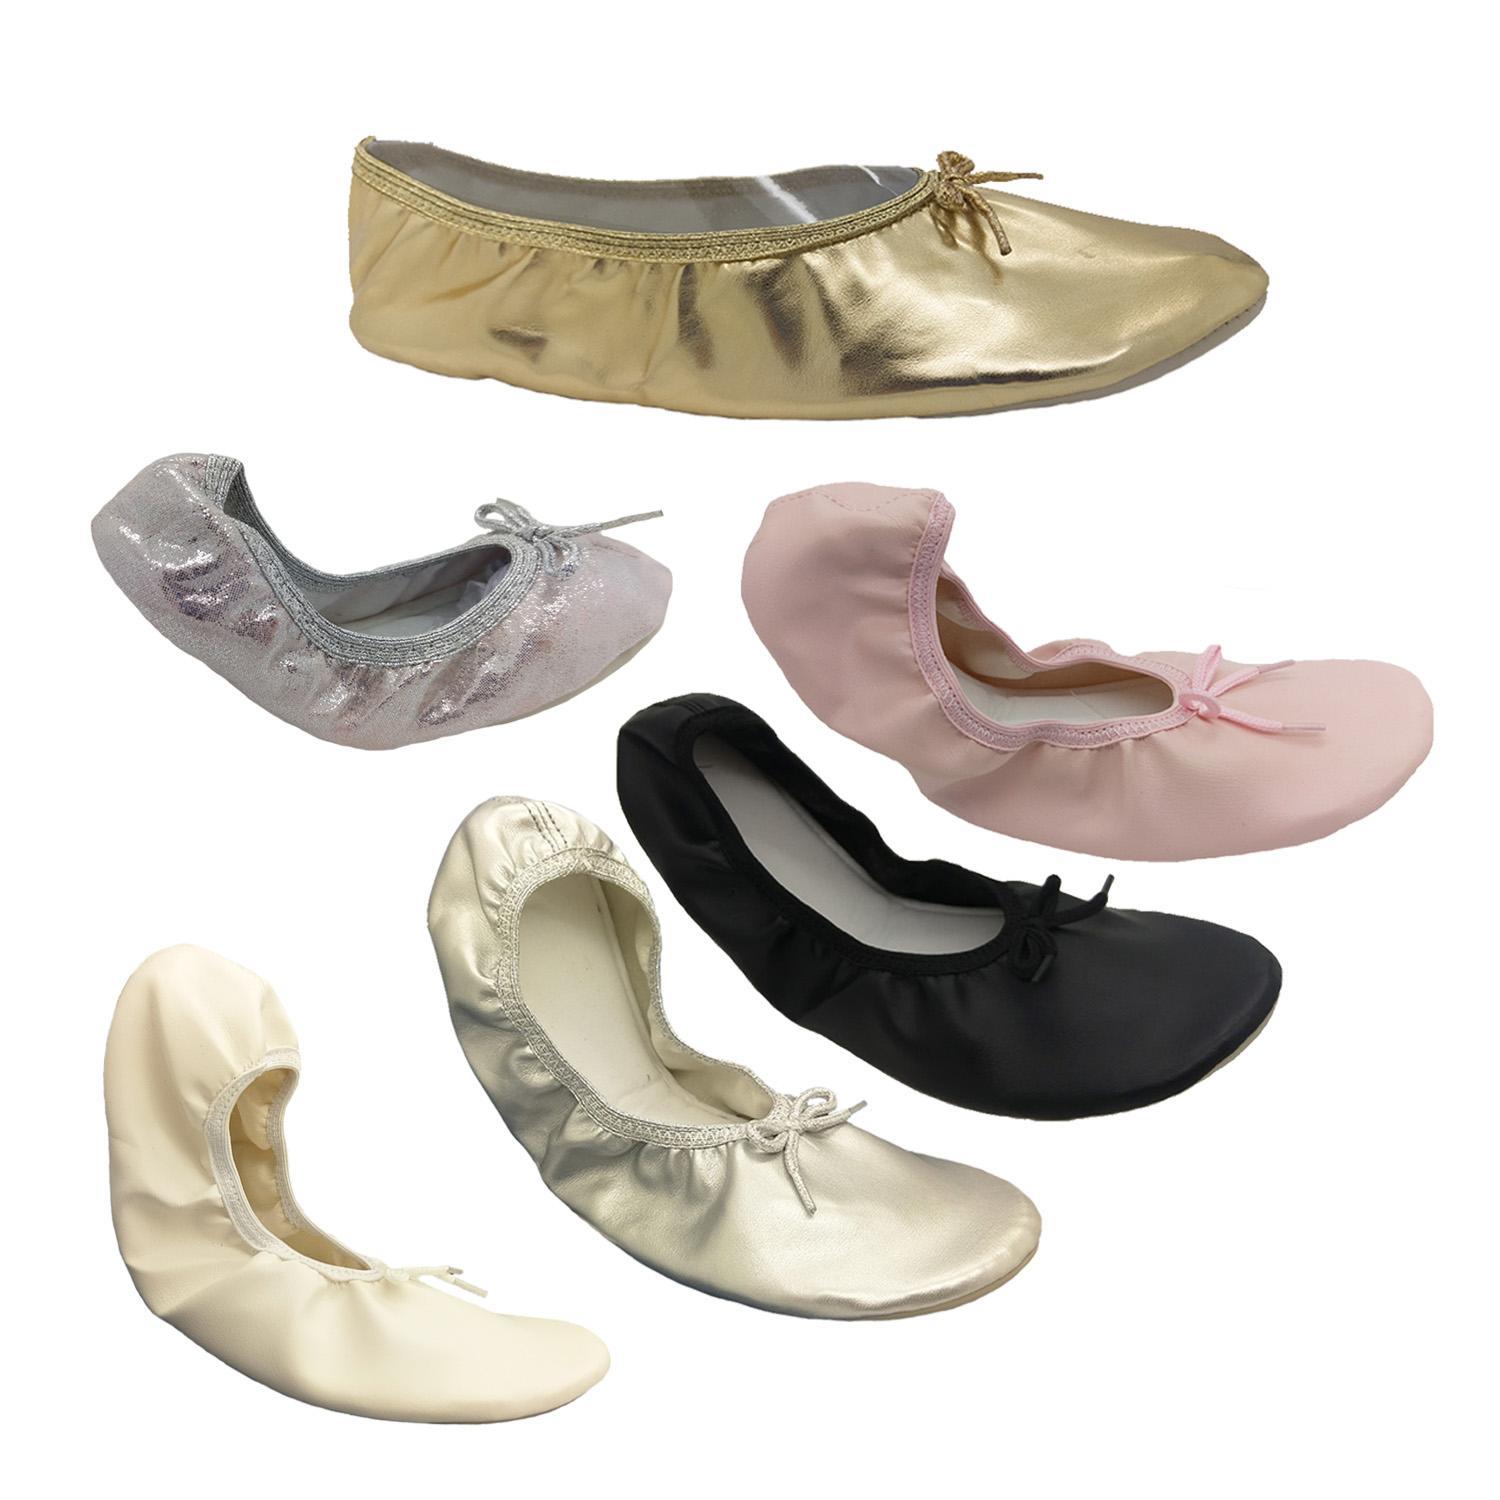 Girls Genuine Jiffies Classic Ballet Flats Elastic Edge Soft Insole Size 5 - 3-White-13-1